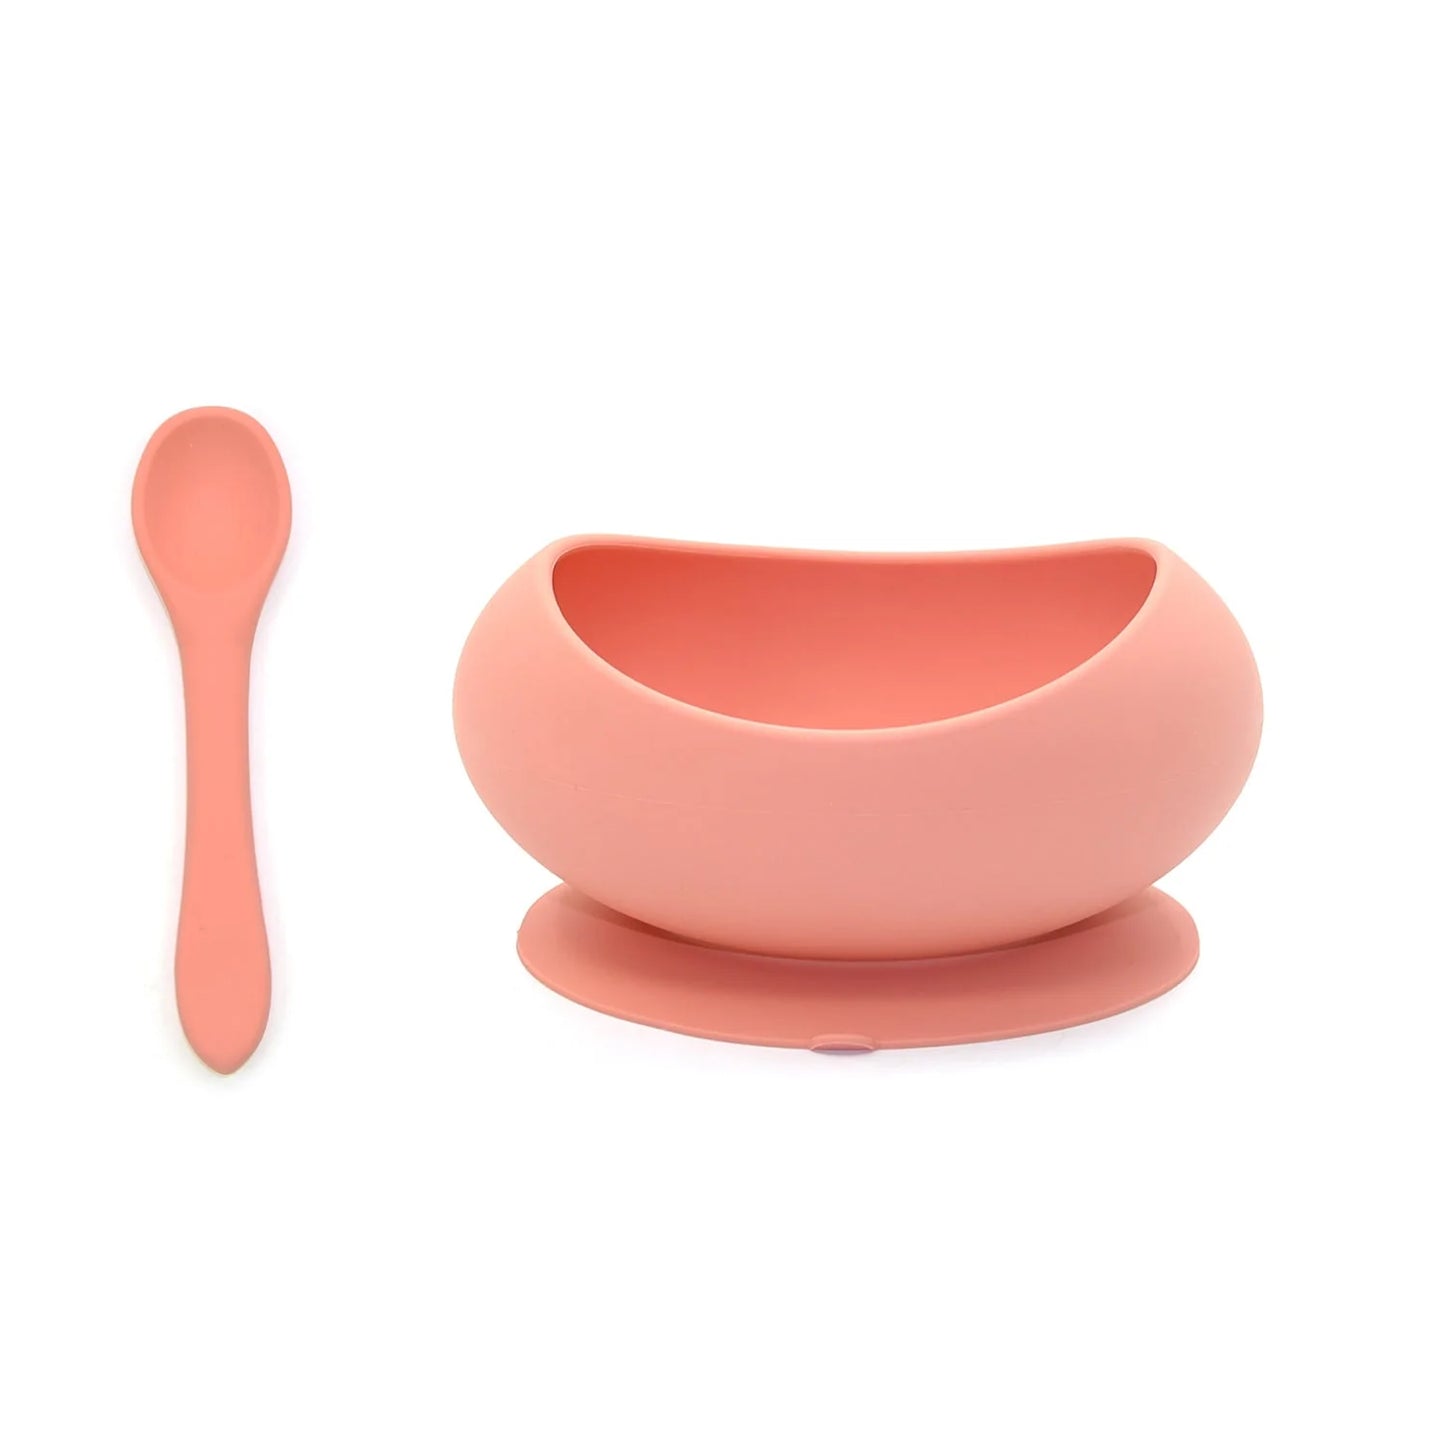 OB Designs Stage 1 Suction Bowl & Spoon Set